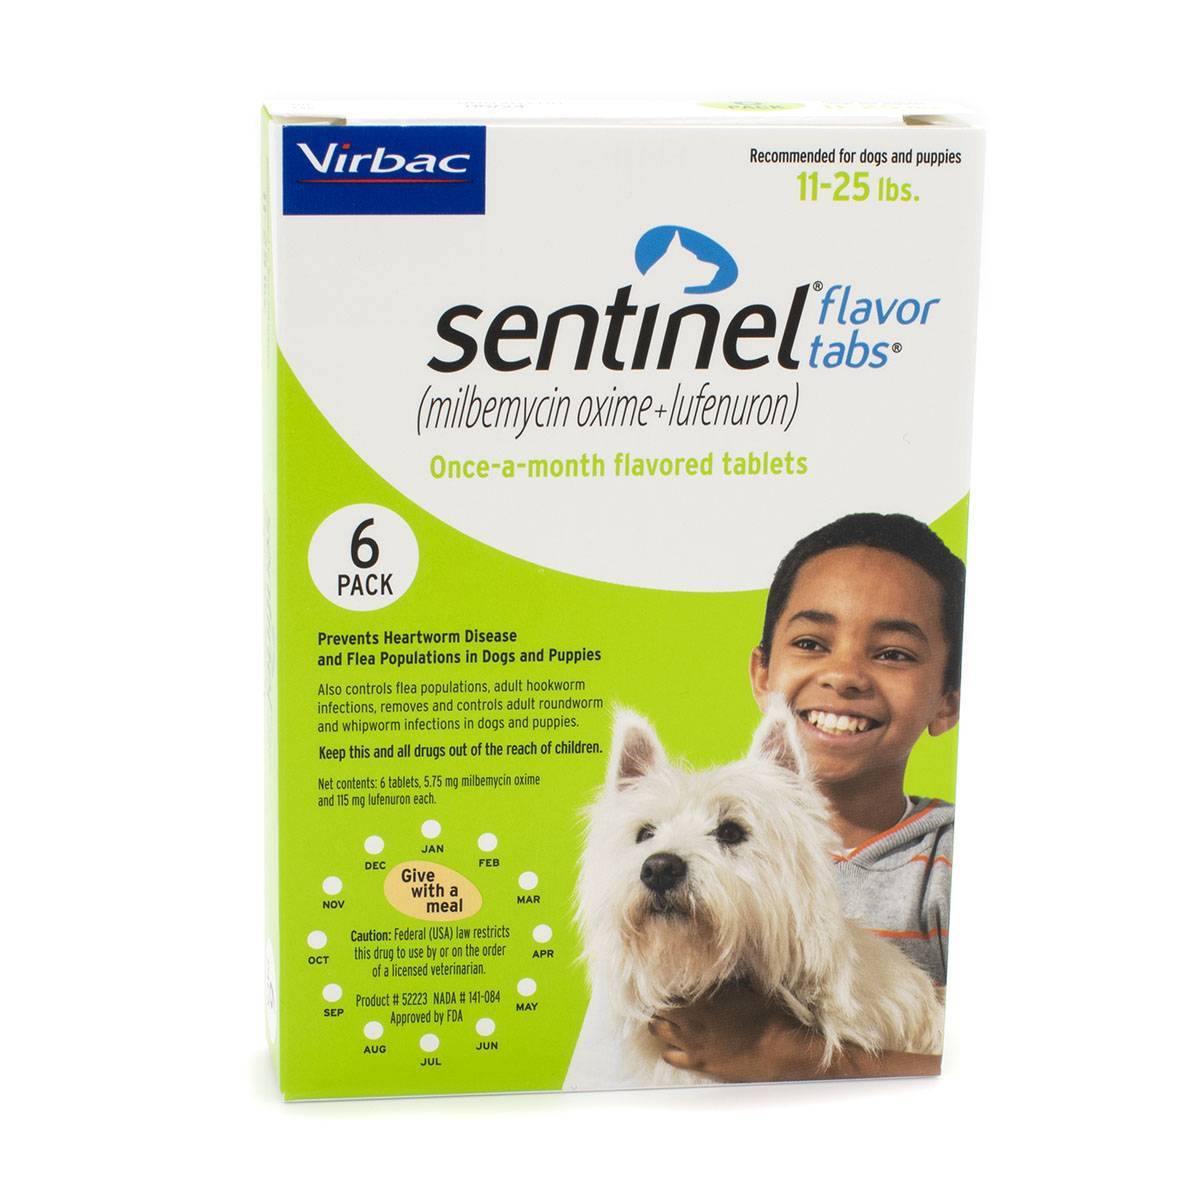 sentinel-flavor-tabs-dog-heartworm-vetrxdirect-pharmacy-11-25-lbs-12-month-supply